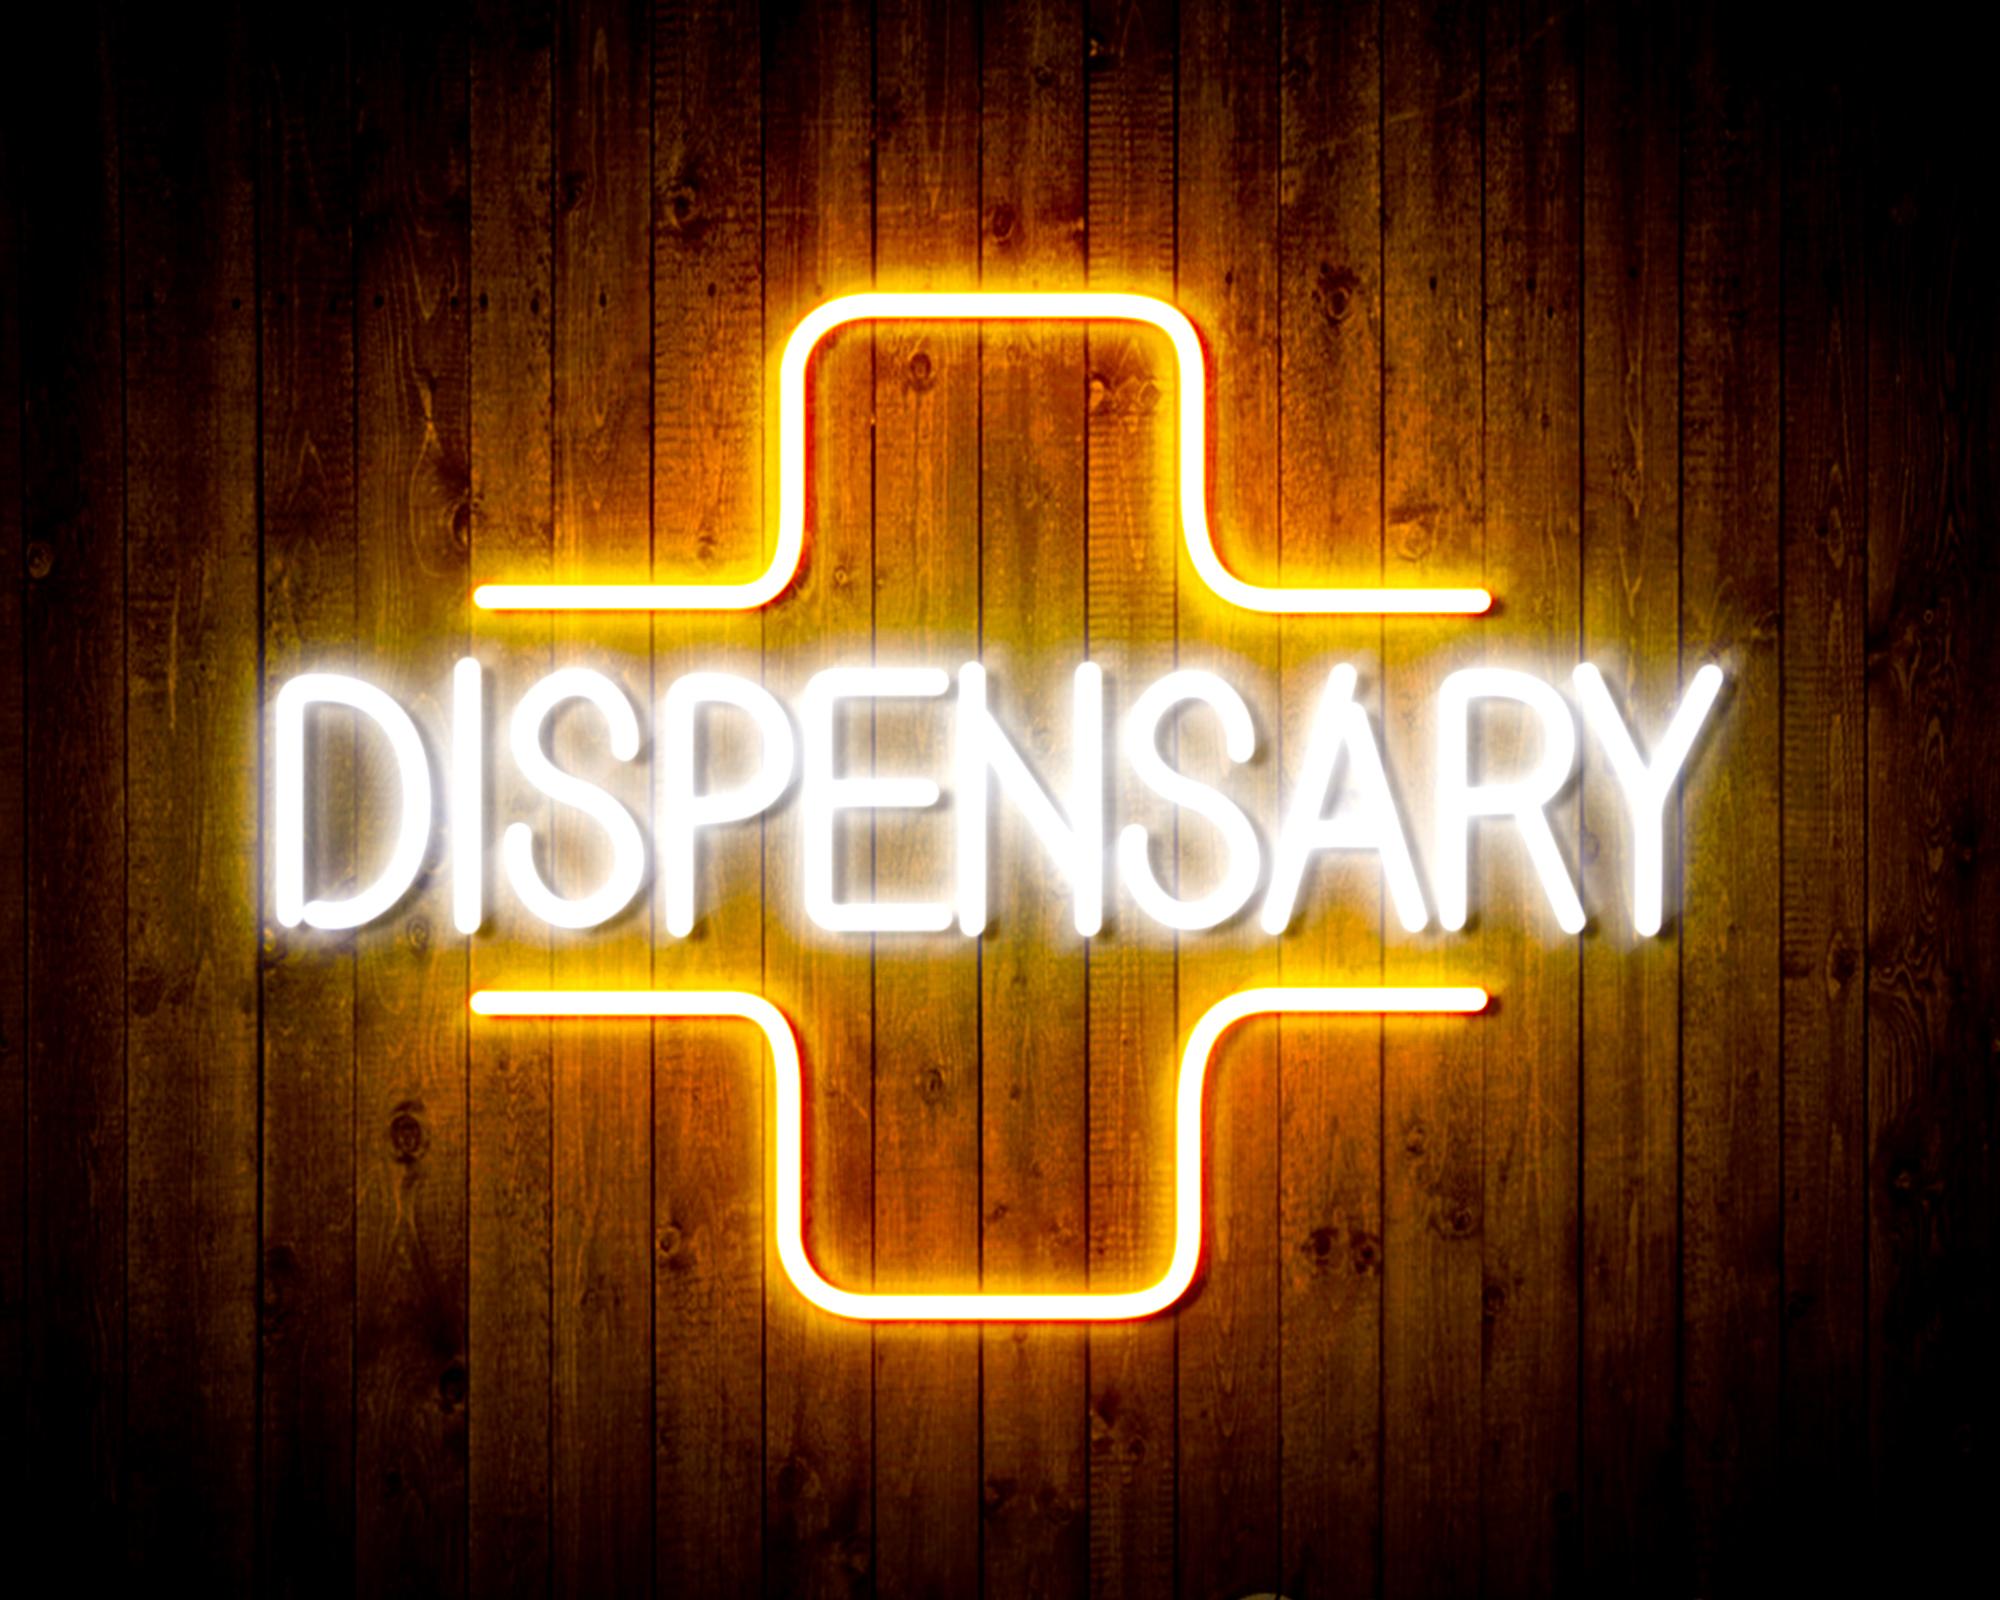 Dispensary with Cross LED Neon Sign Wall Light